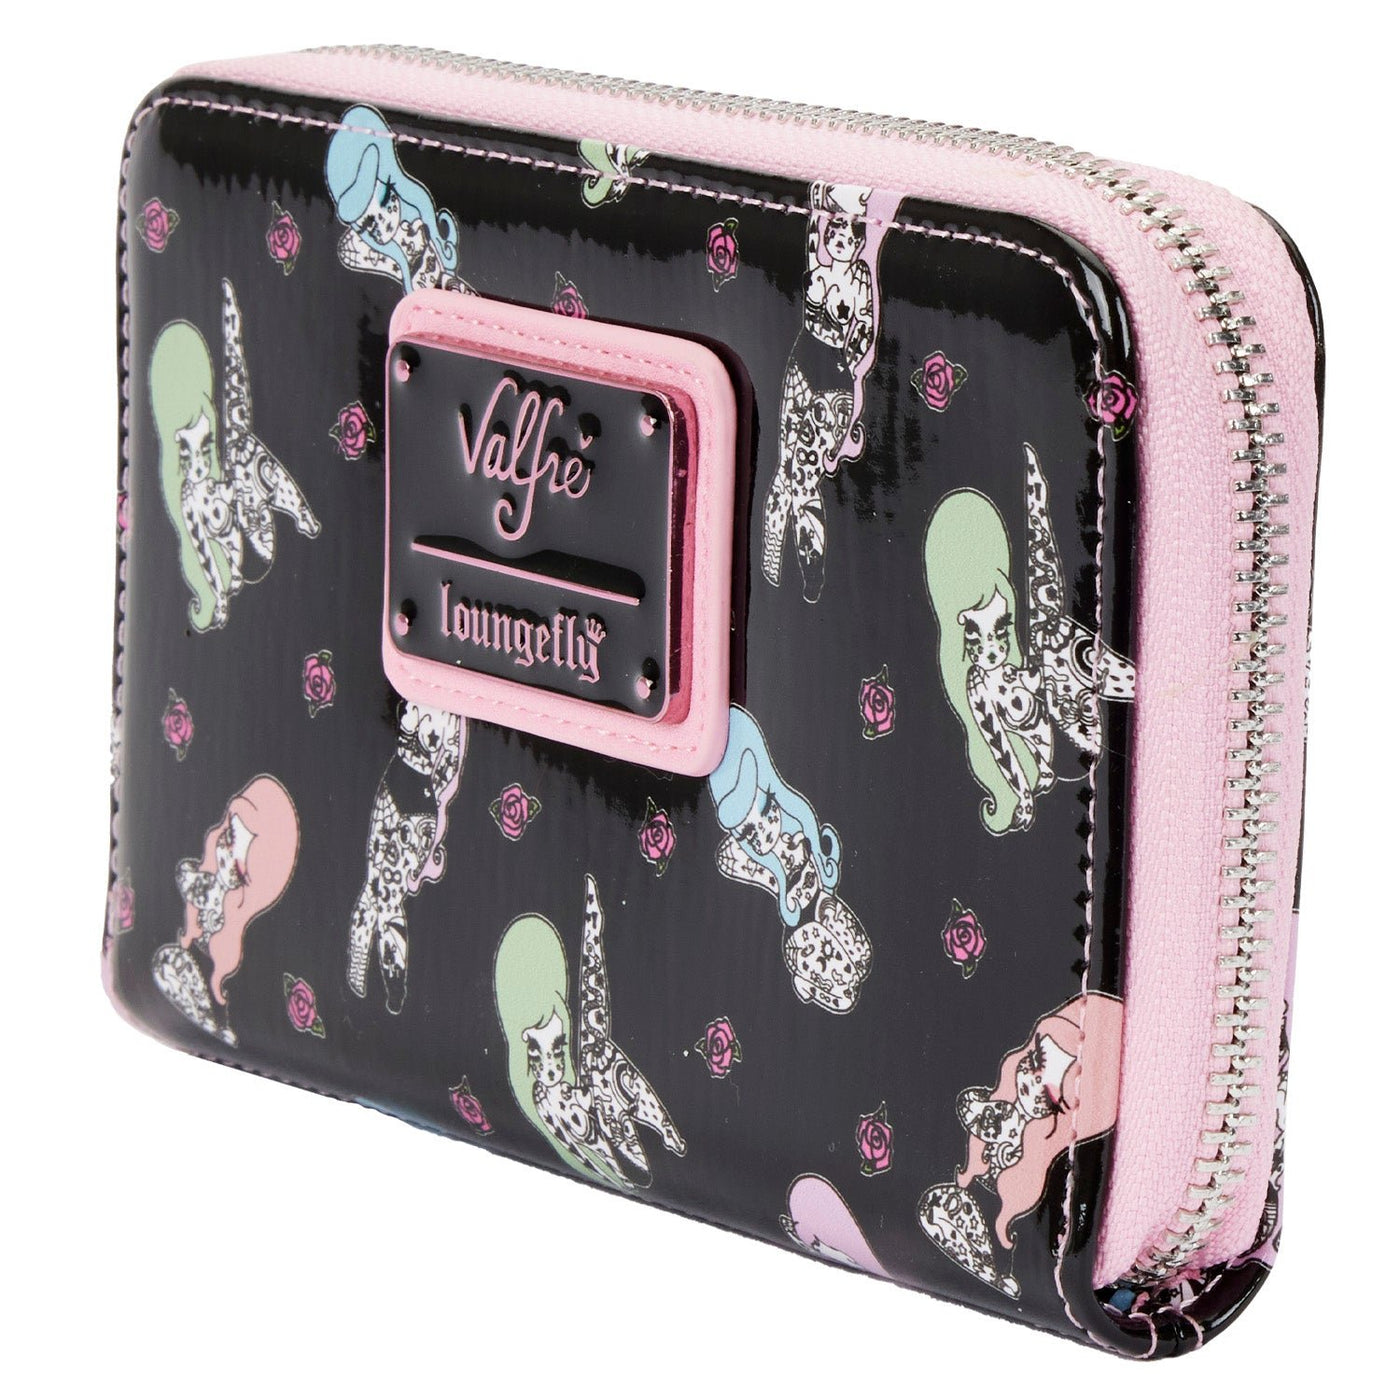 Loungefly Valfre Tattoo Allover Print Zip-Around Wallet - Side View